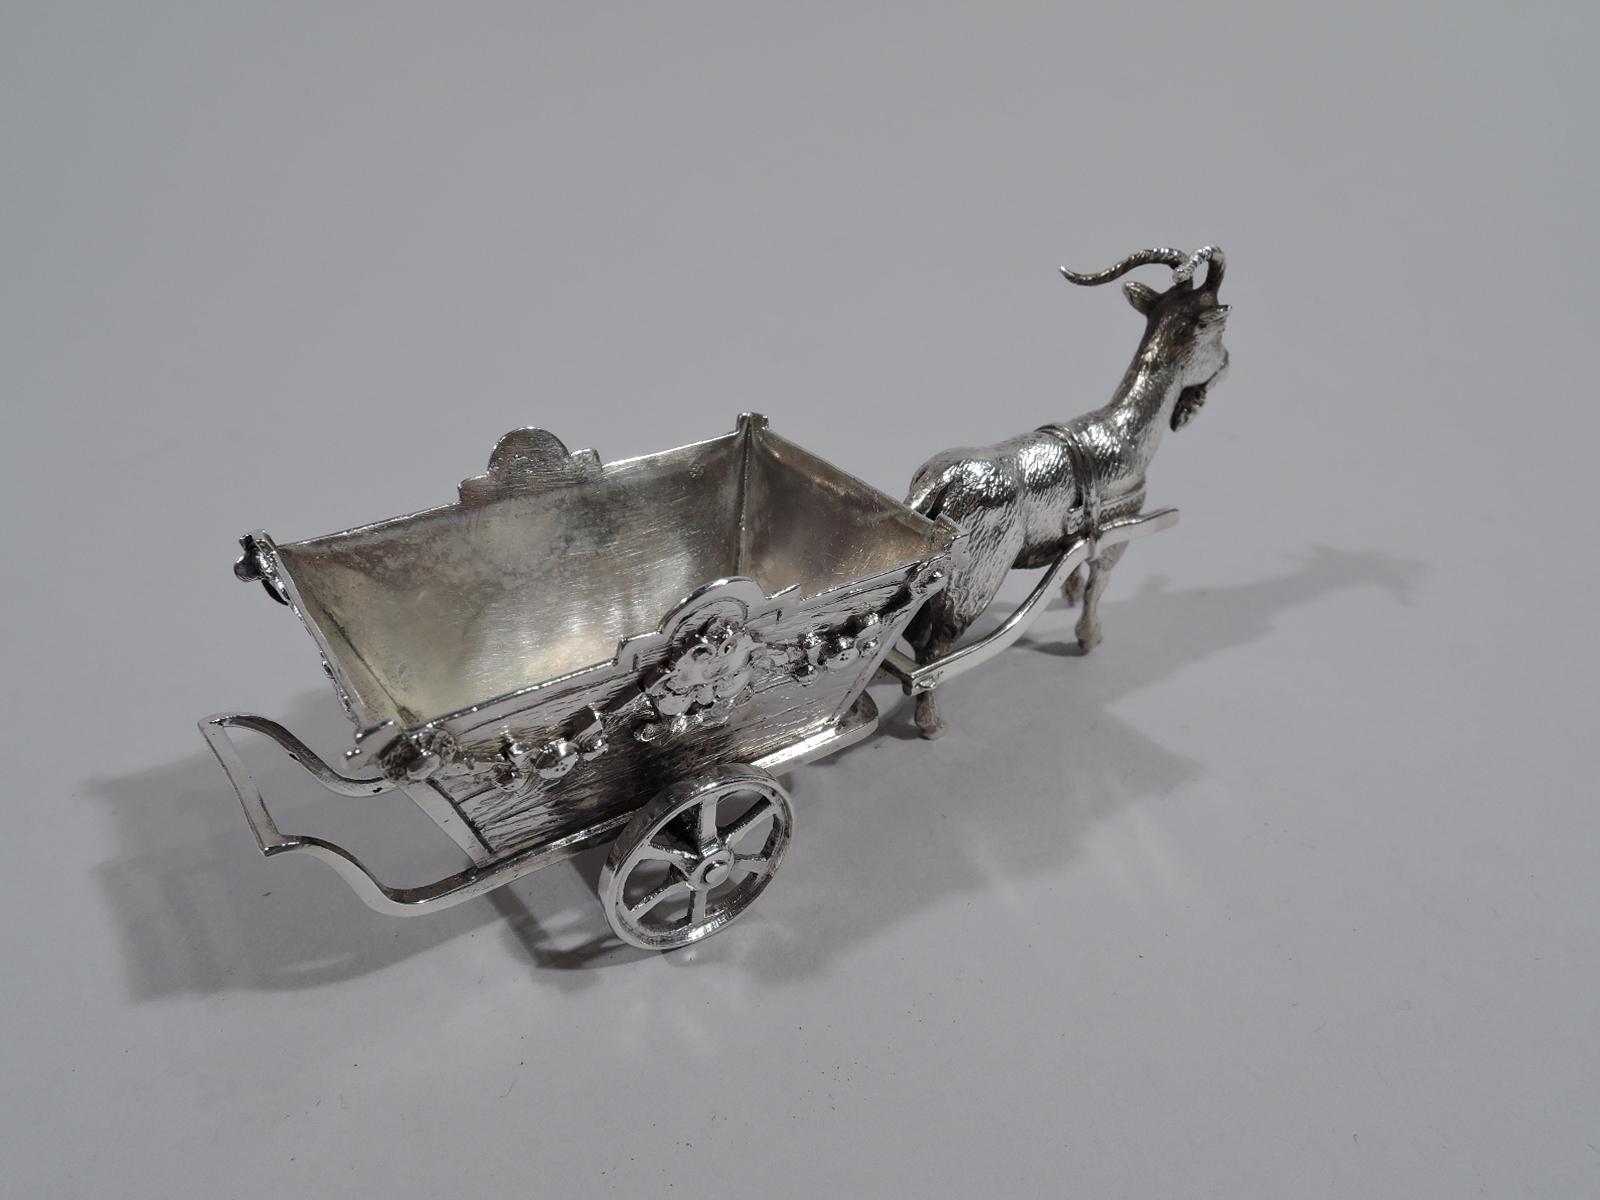 Victorian Antique German Silver Miniature Goat-Harnessed Country Cart